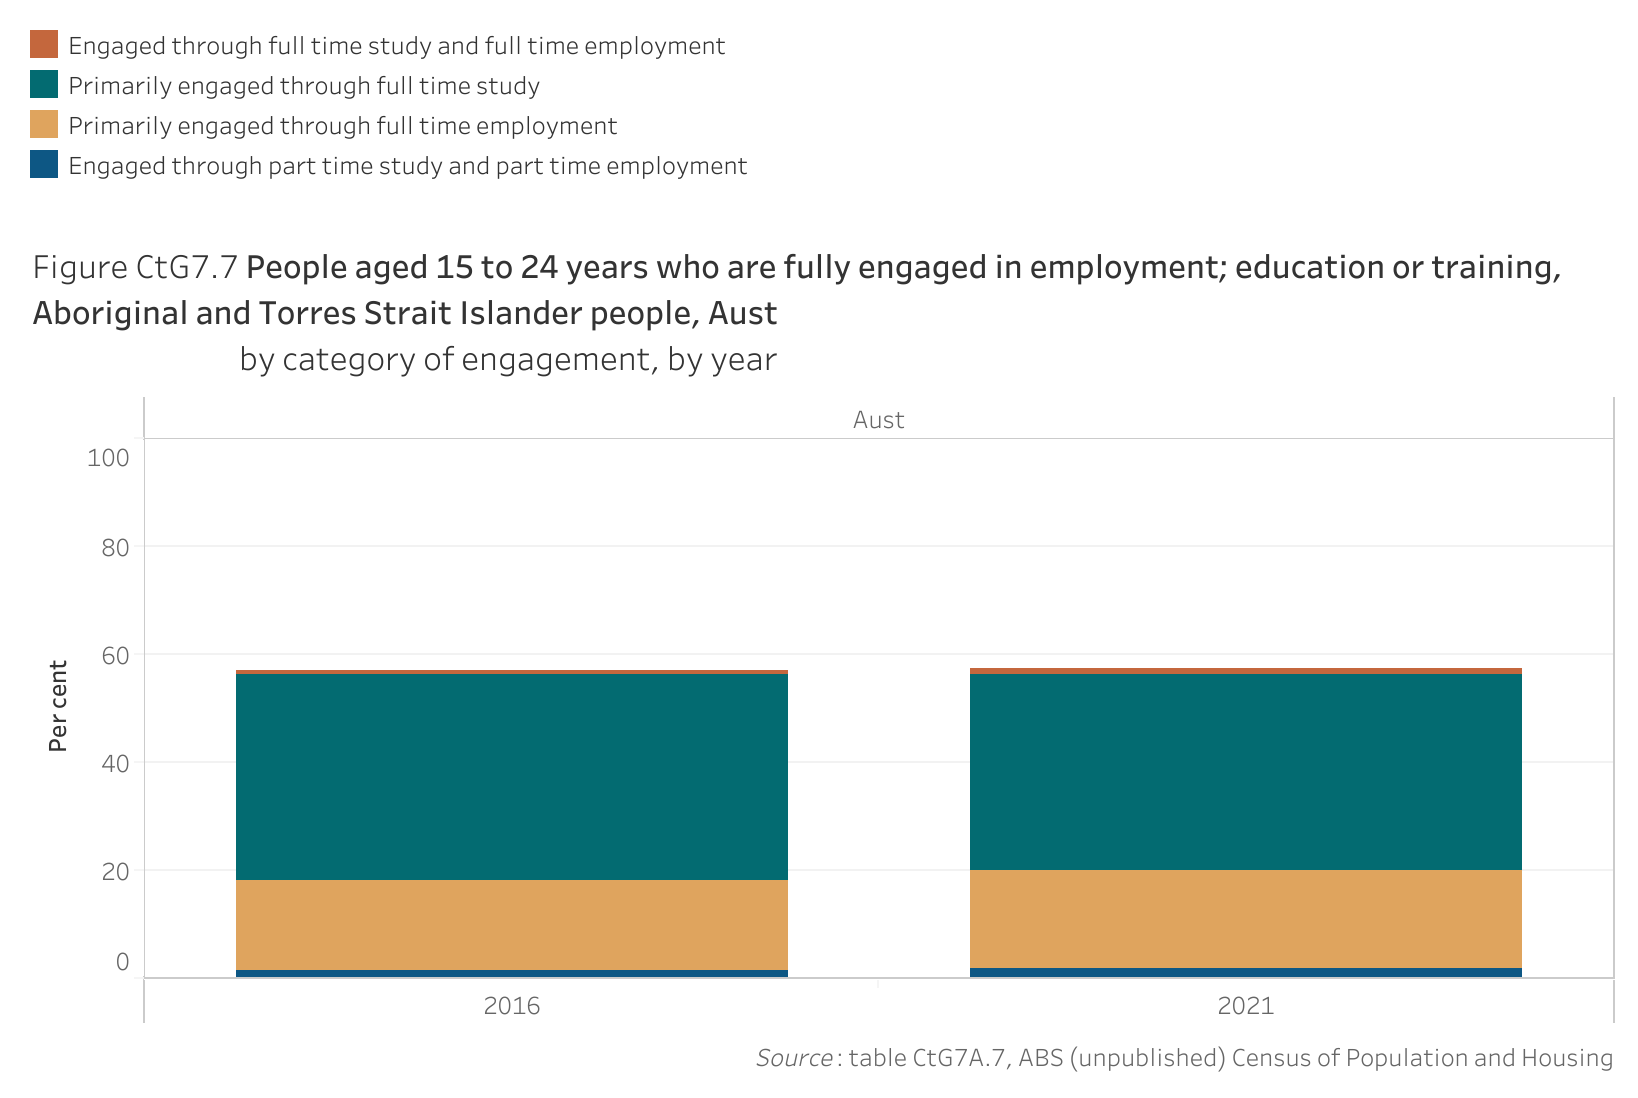 Figure CtG7.7 shows people aged 15 to 24 years who are fully engaged in employment; education or training, Aboriginal and Torres Strait Islander people, Australia, by category of engagement, by year. More details can be found within the text near this image.